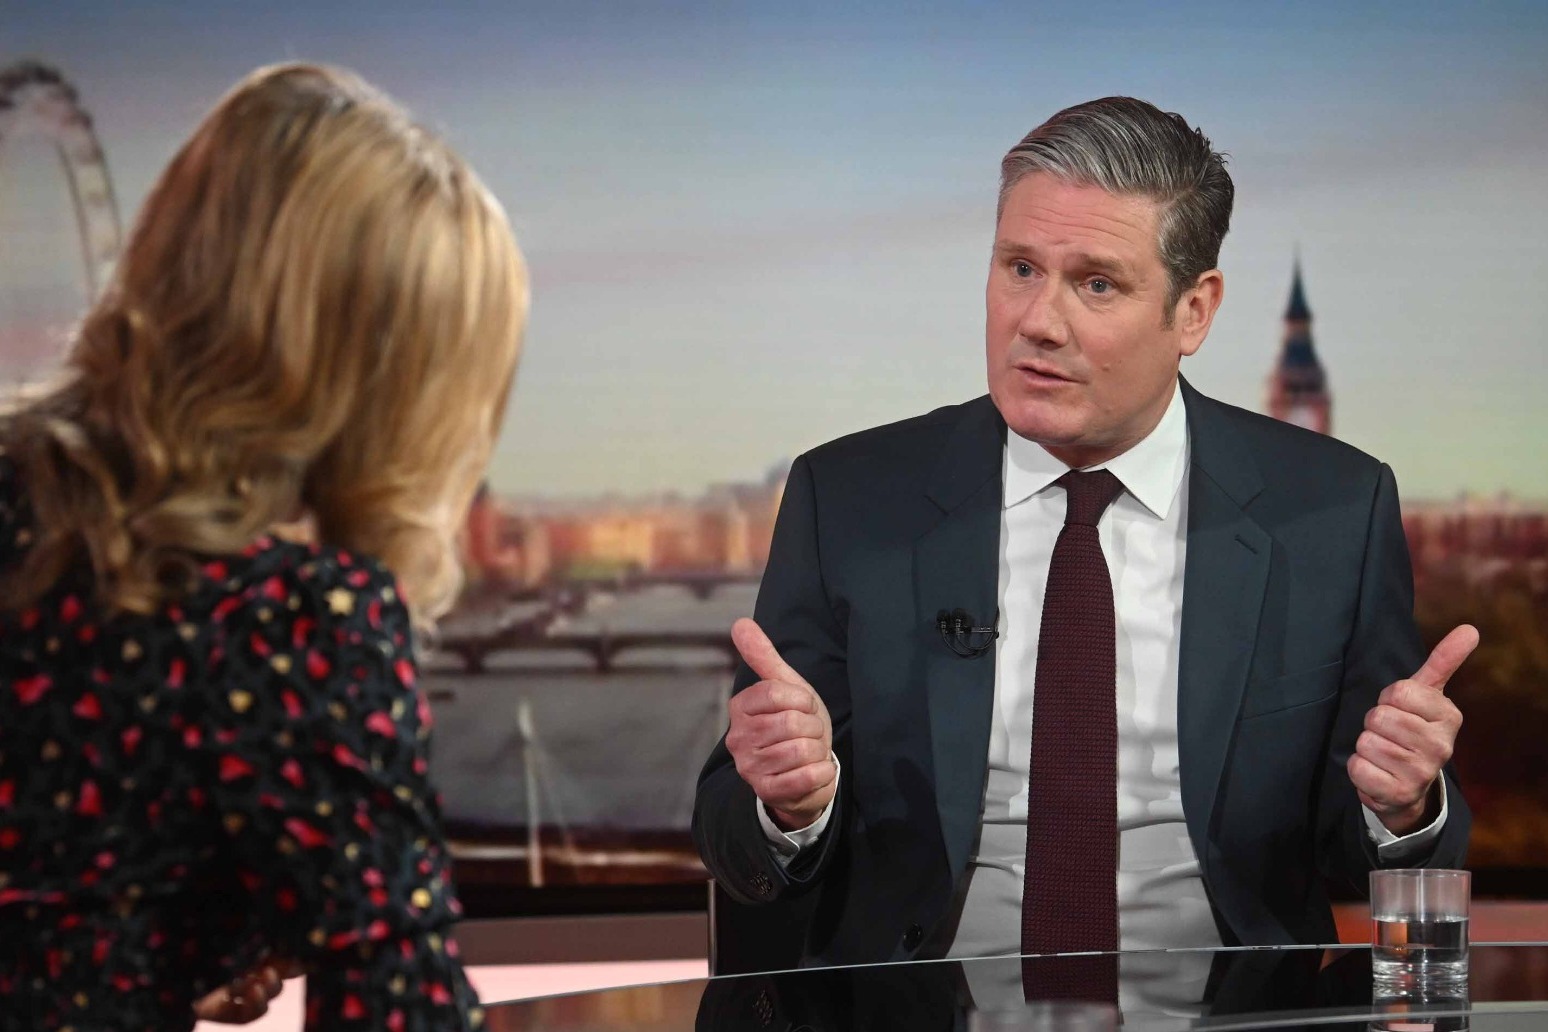 Starmer condemns Westminsters misogynist culture after attack on Rayner